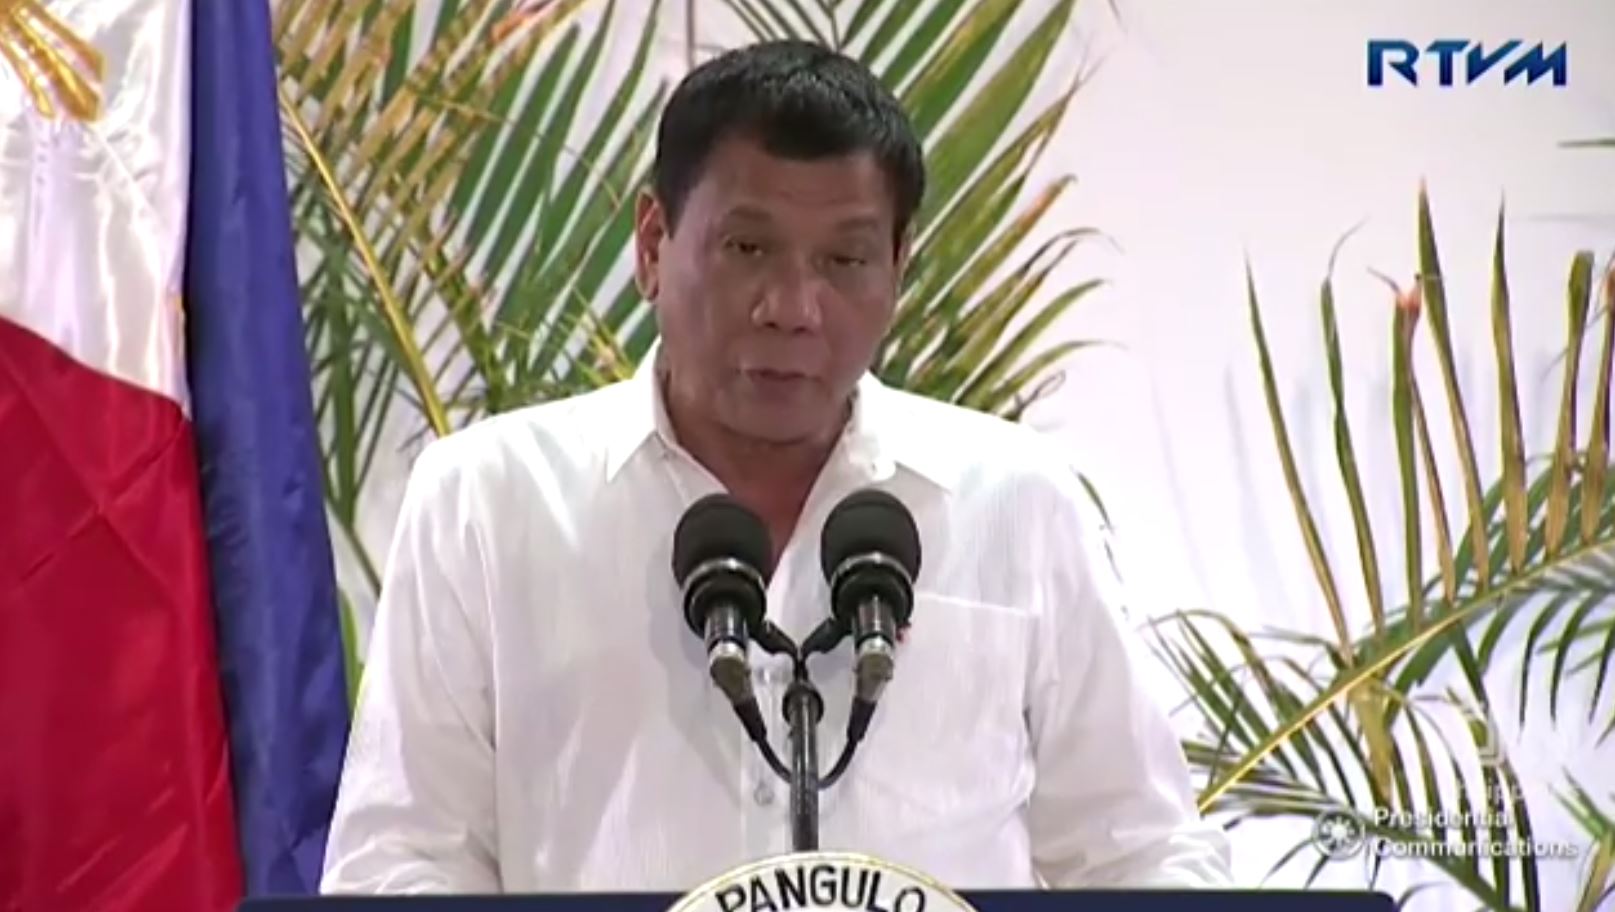 President Rodrigo Duterte delivers his "cuss-free" speech and press briefing at the Davao International AIrport upon his arrival from Japan. (photo grabbed from RTVM video)